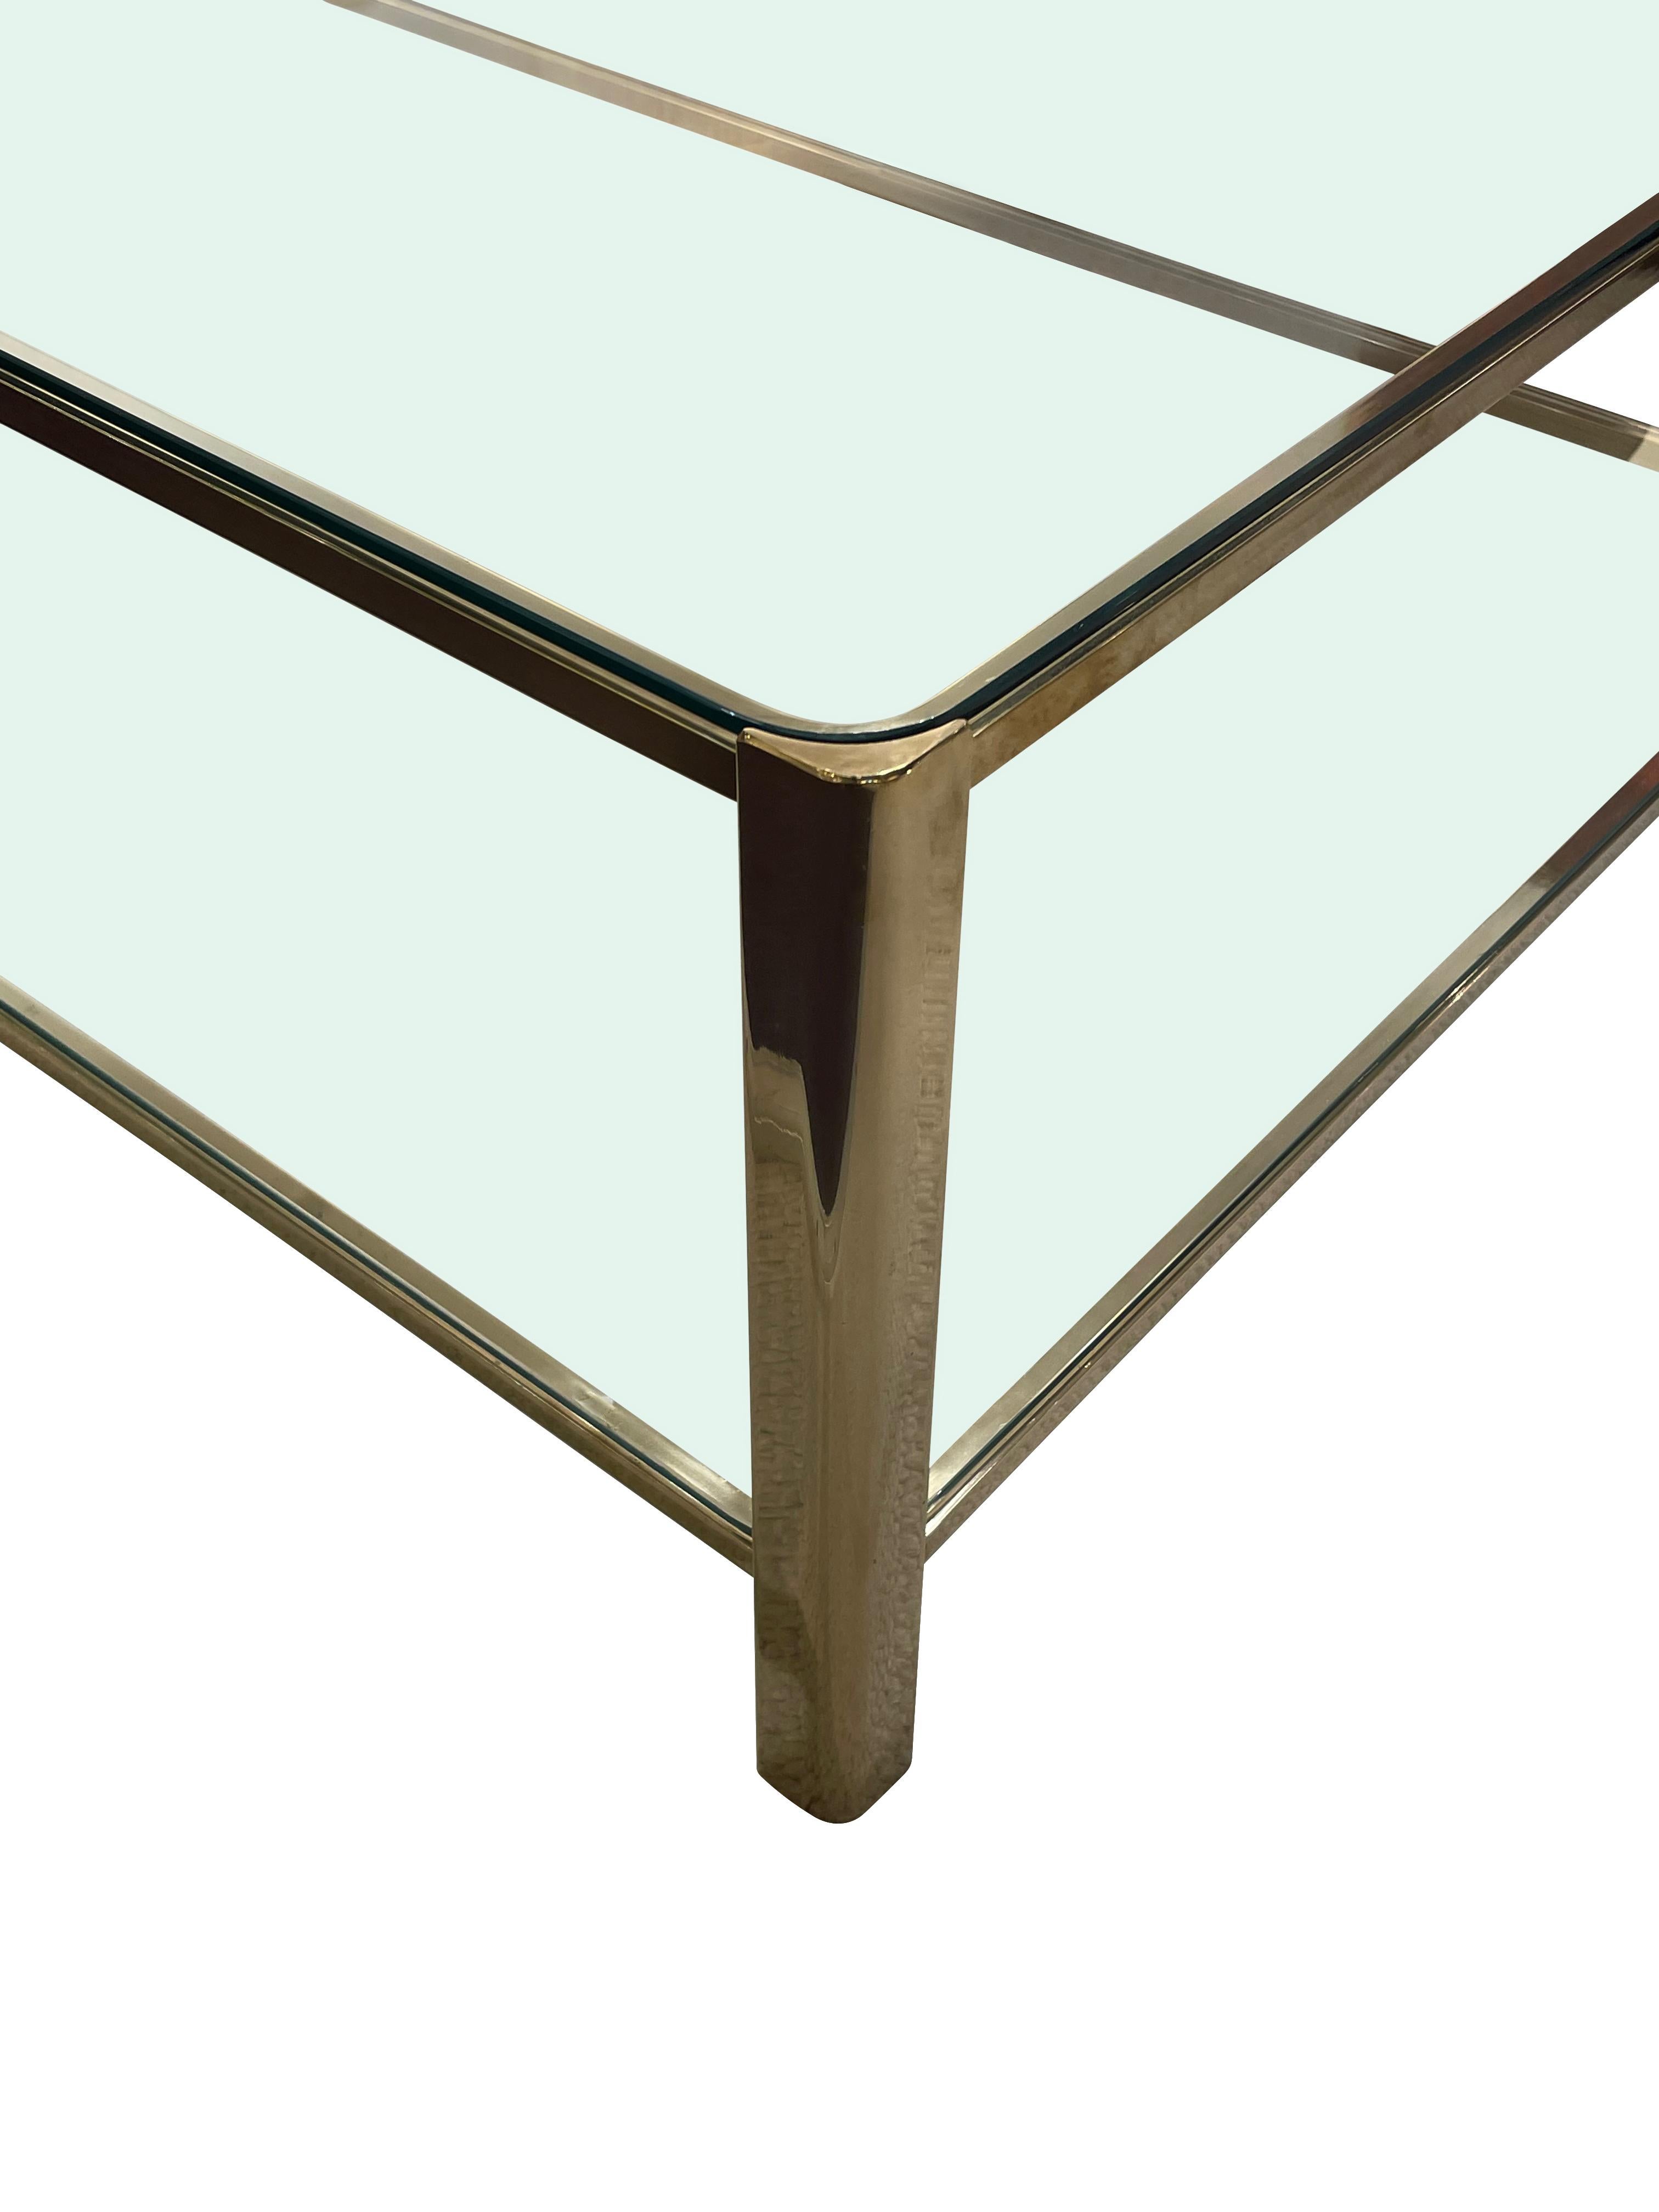 French Glass And Bronze Coffee Table By Jacques Quinet, France, 1940s For Sale